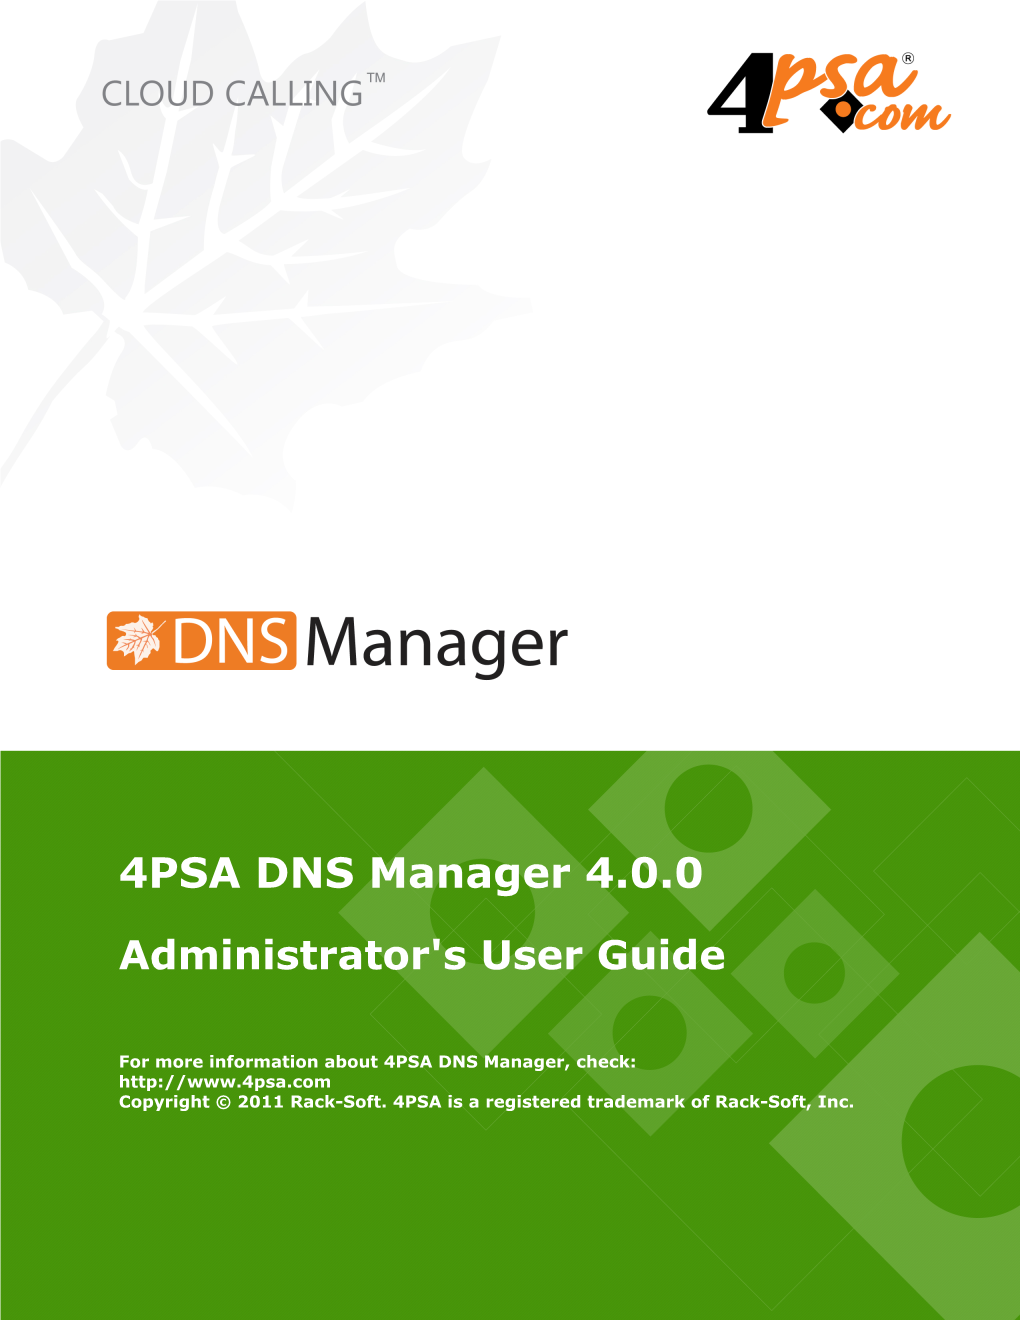 4PSA DNS Manager 4.0.0